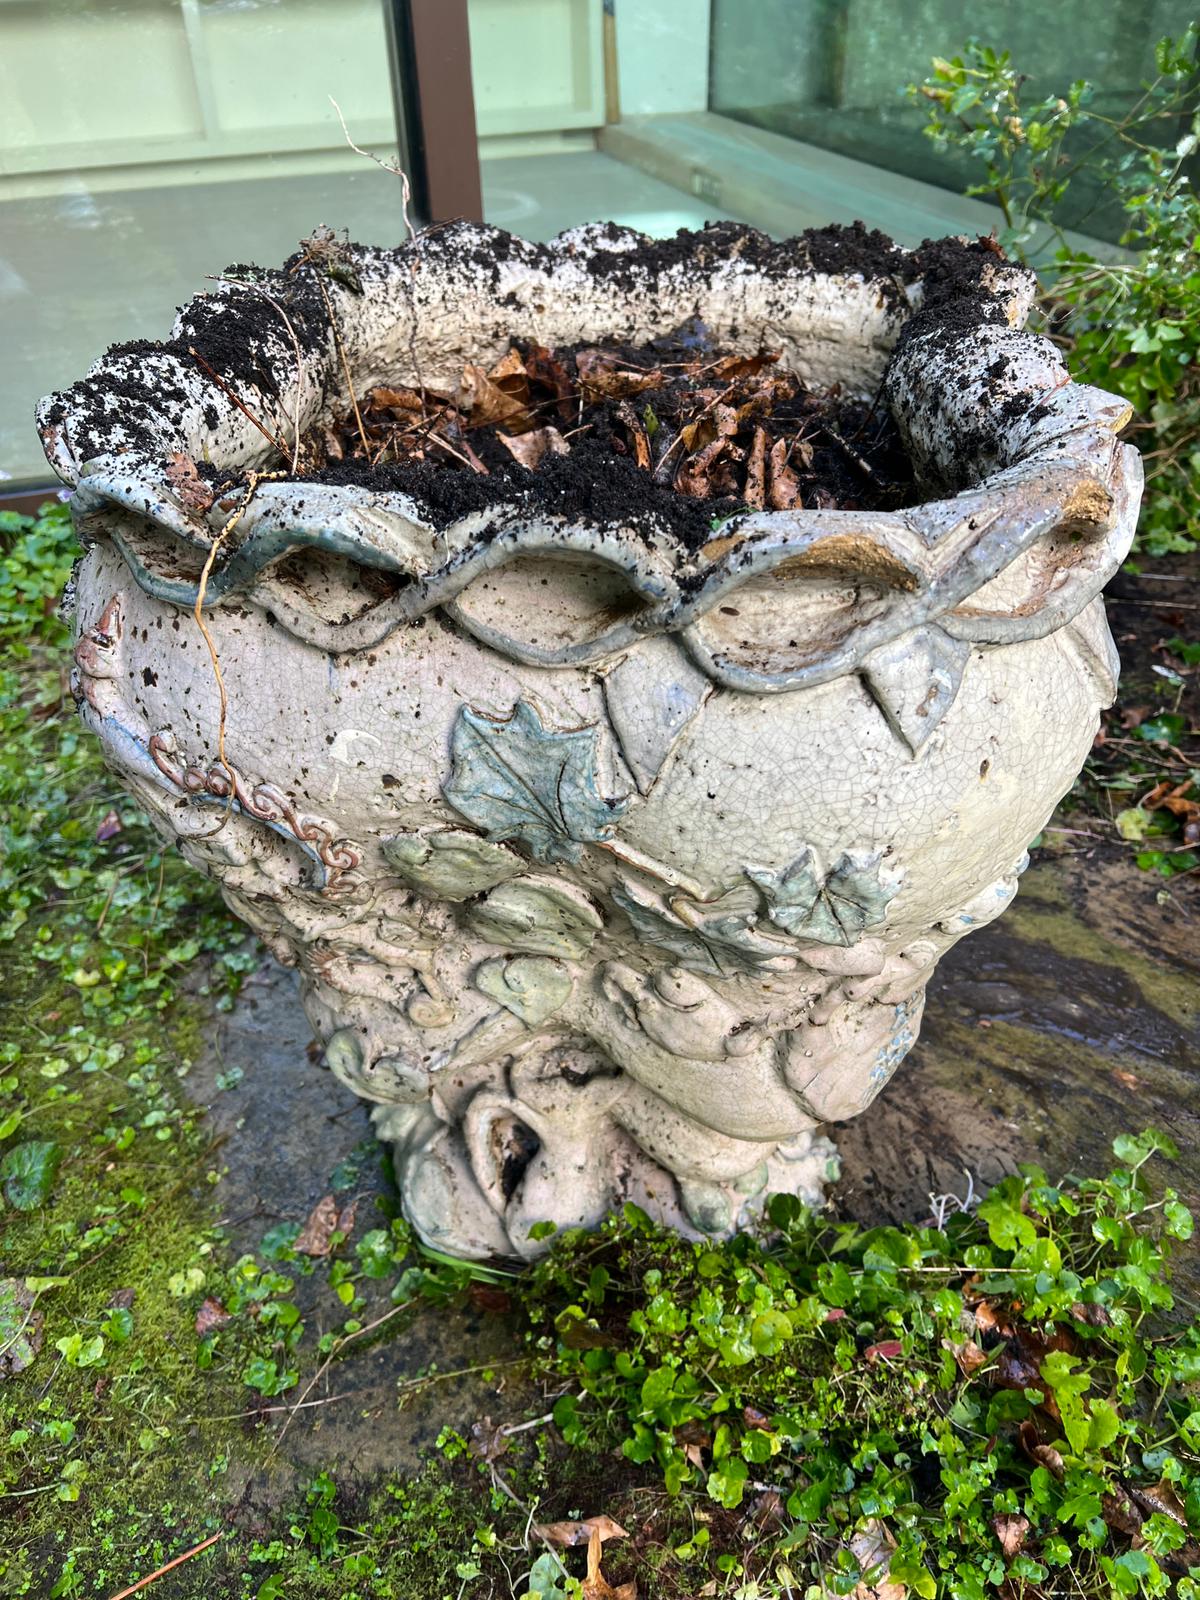 A glazed ceramic planter with platted design around the top and natural scene including a clock in a - Image 15 of 16